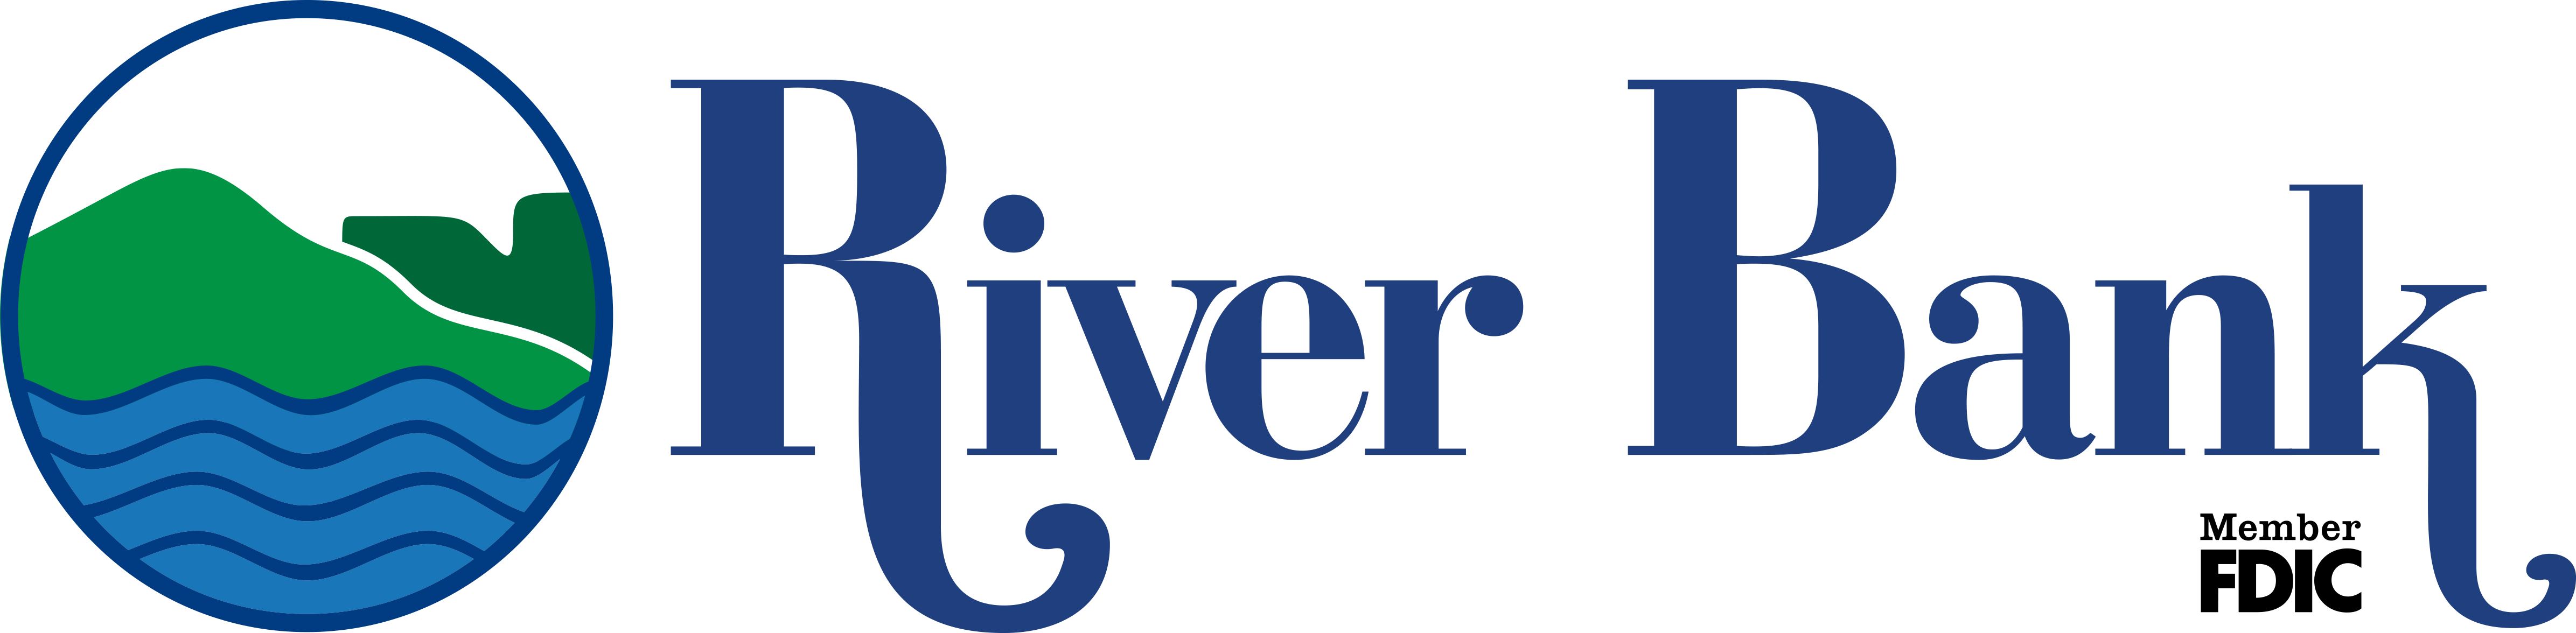 River Bank full color logo with FDIC